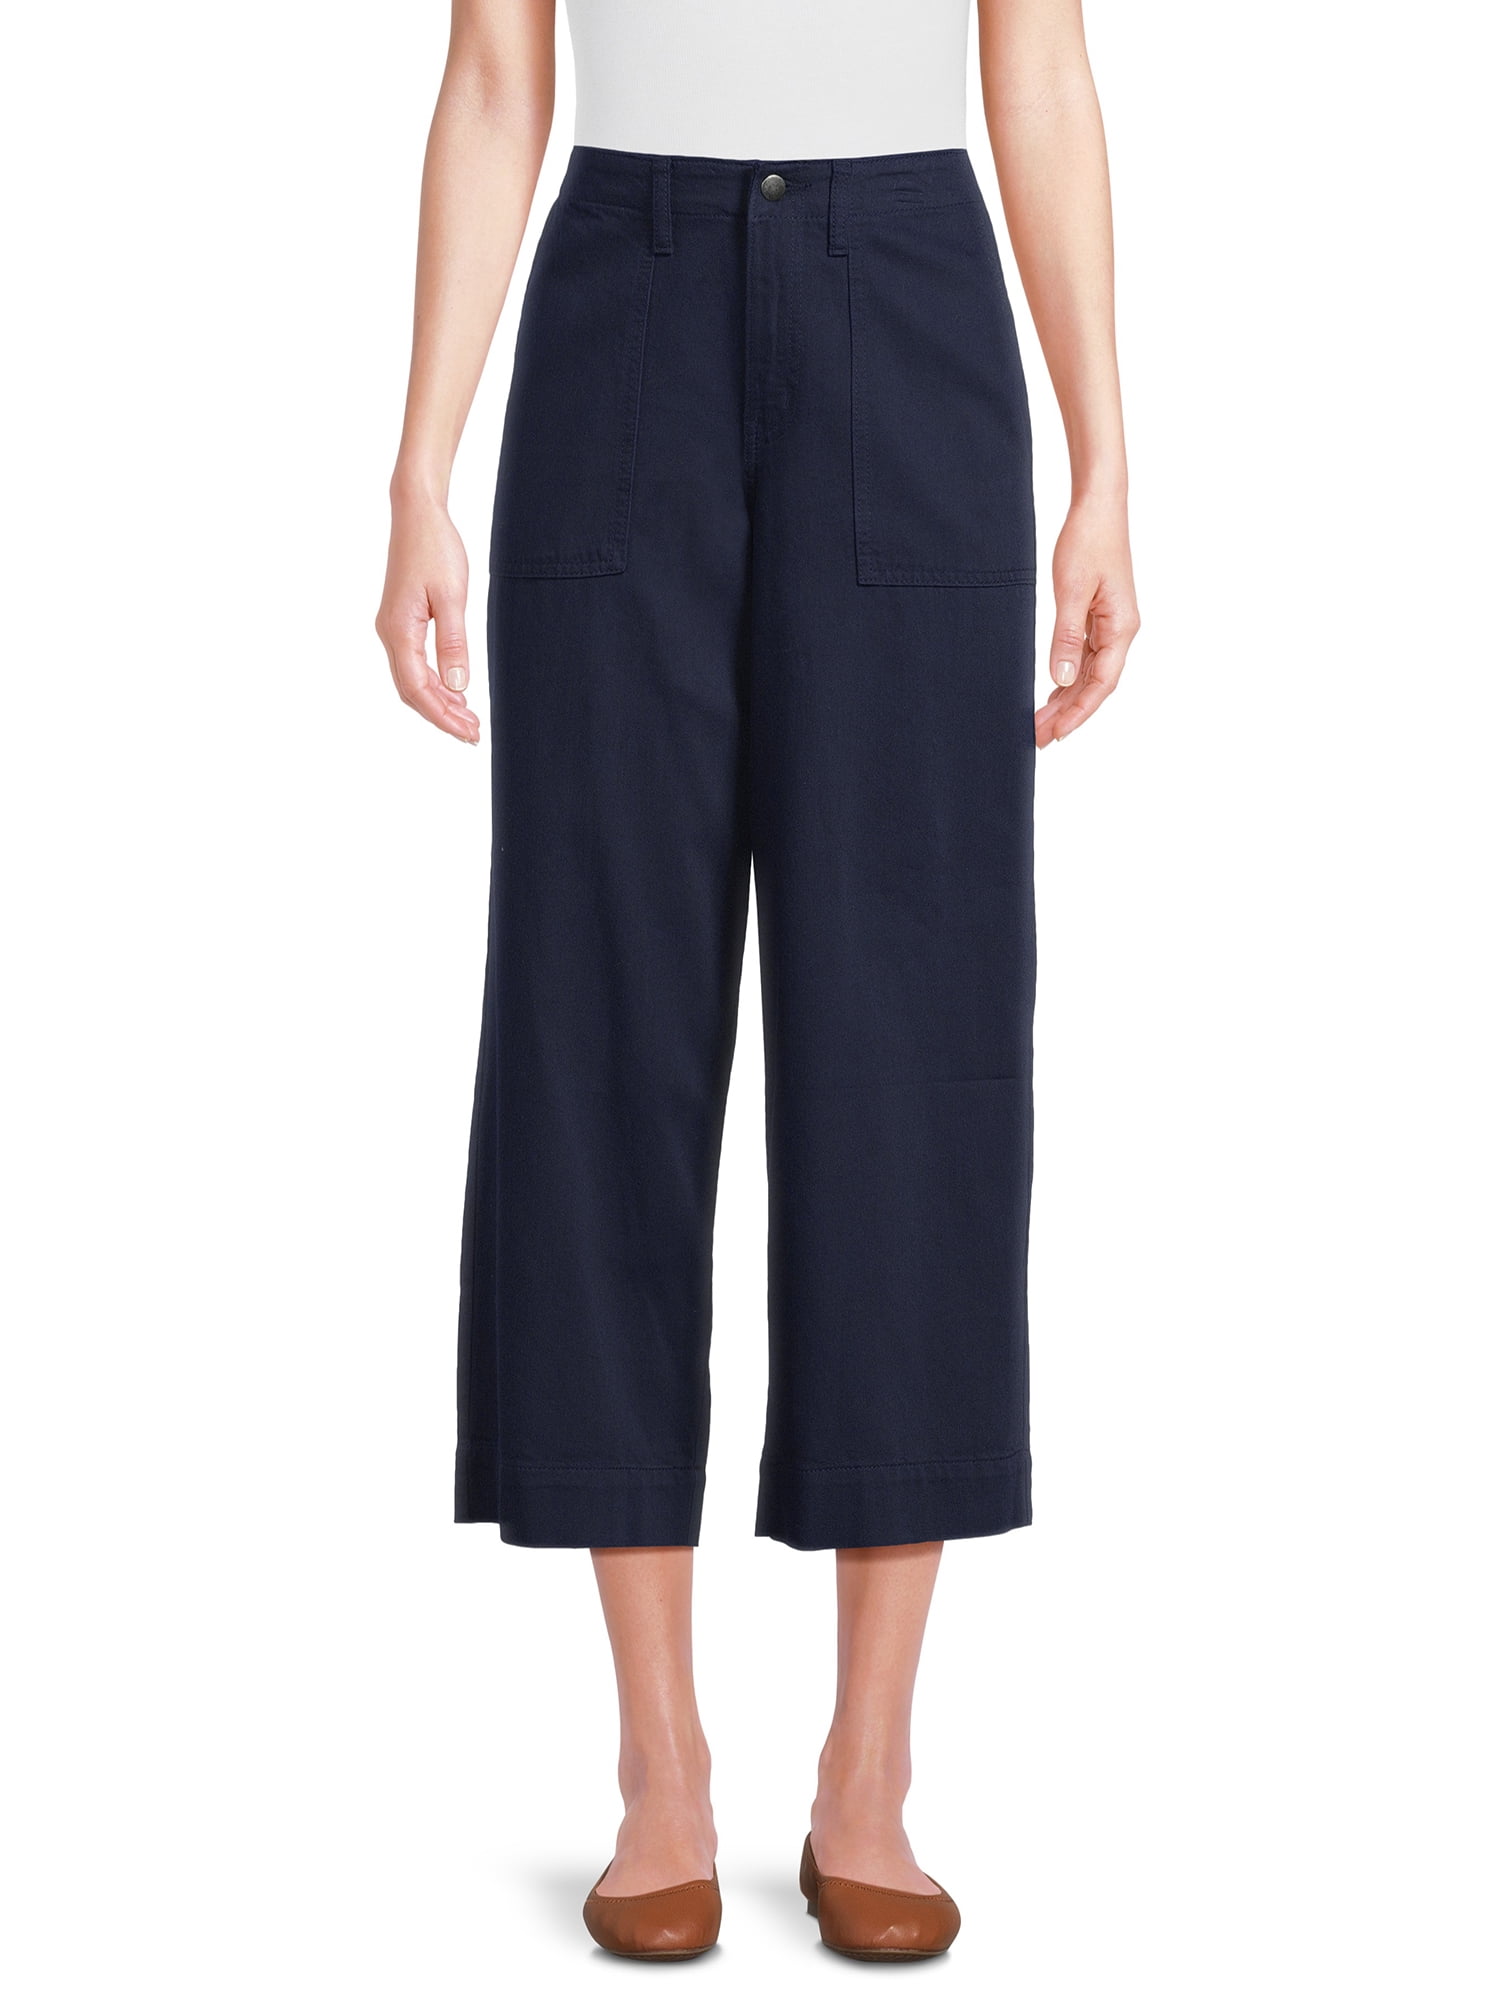 Time and Tru Women's Cropped Wide Leg Pants, Inseam 24